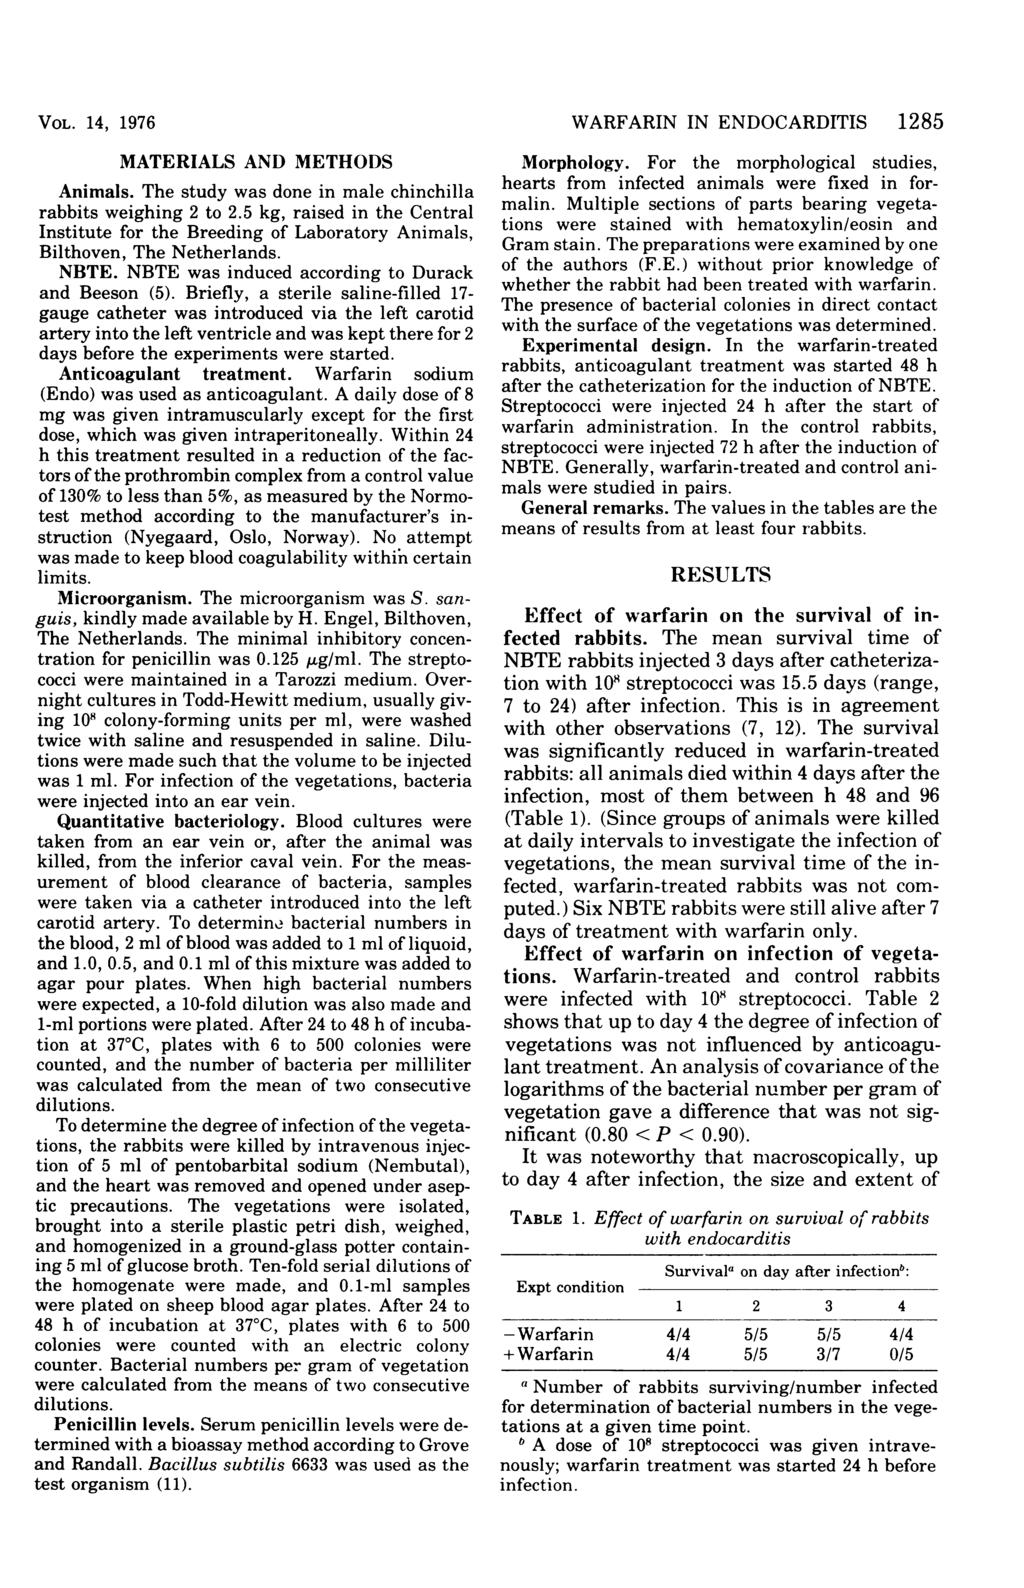 VOL. 14, 1976 MATERIALS AND METHODS Animals. The study was done in male chinchilla rabbits weighing 2 to 2.